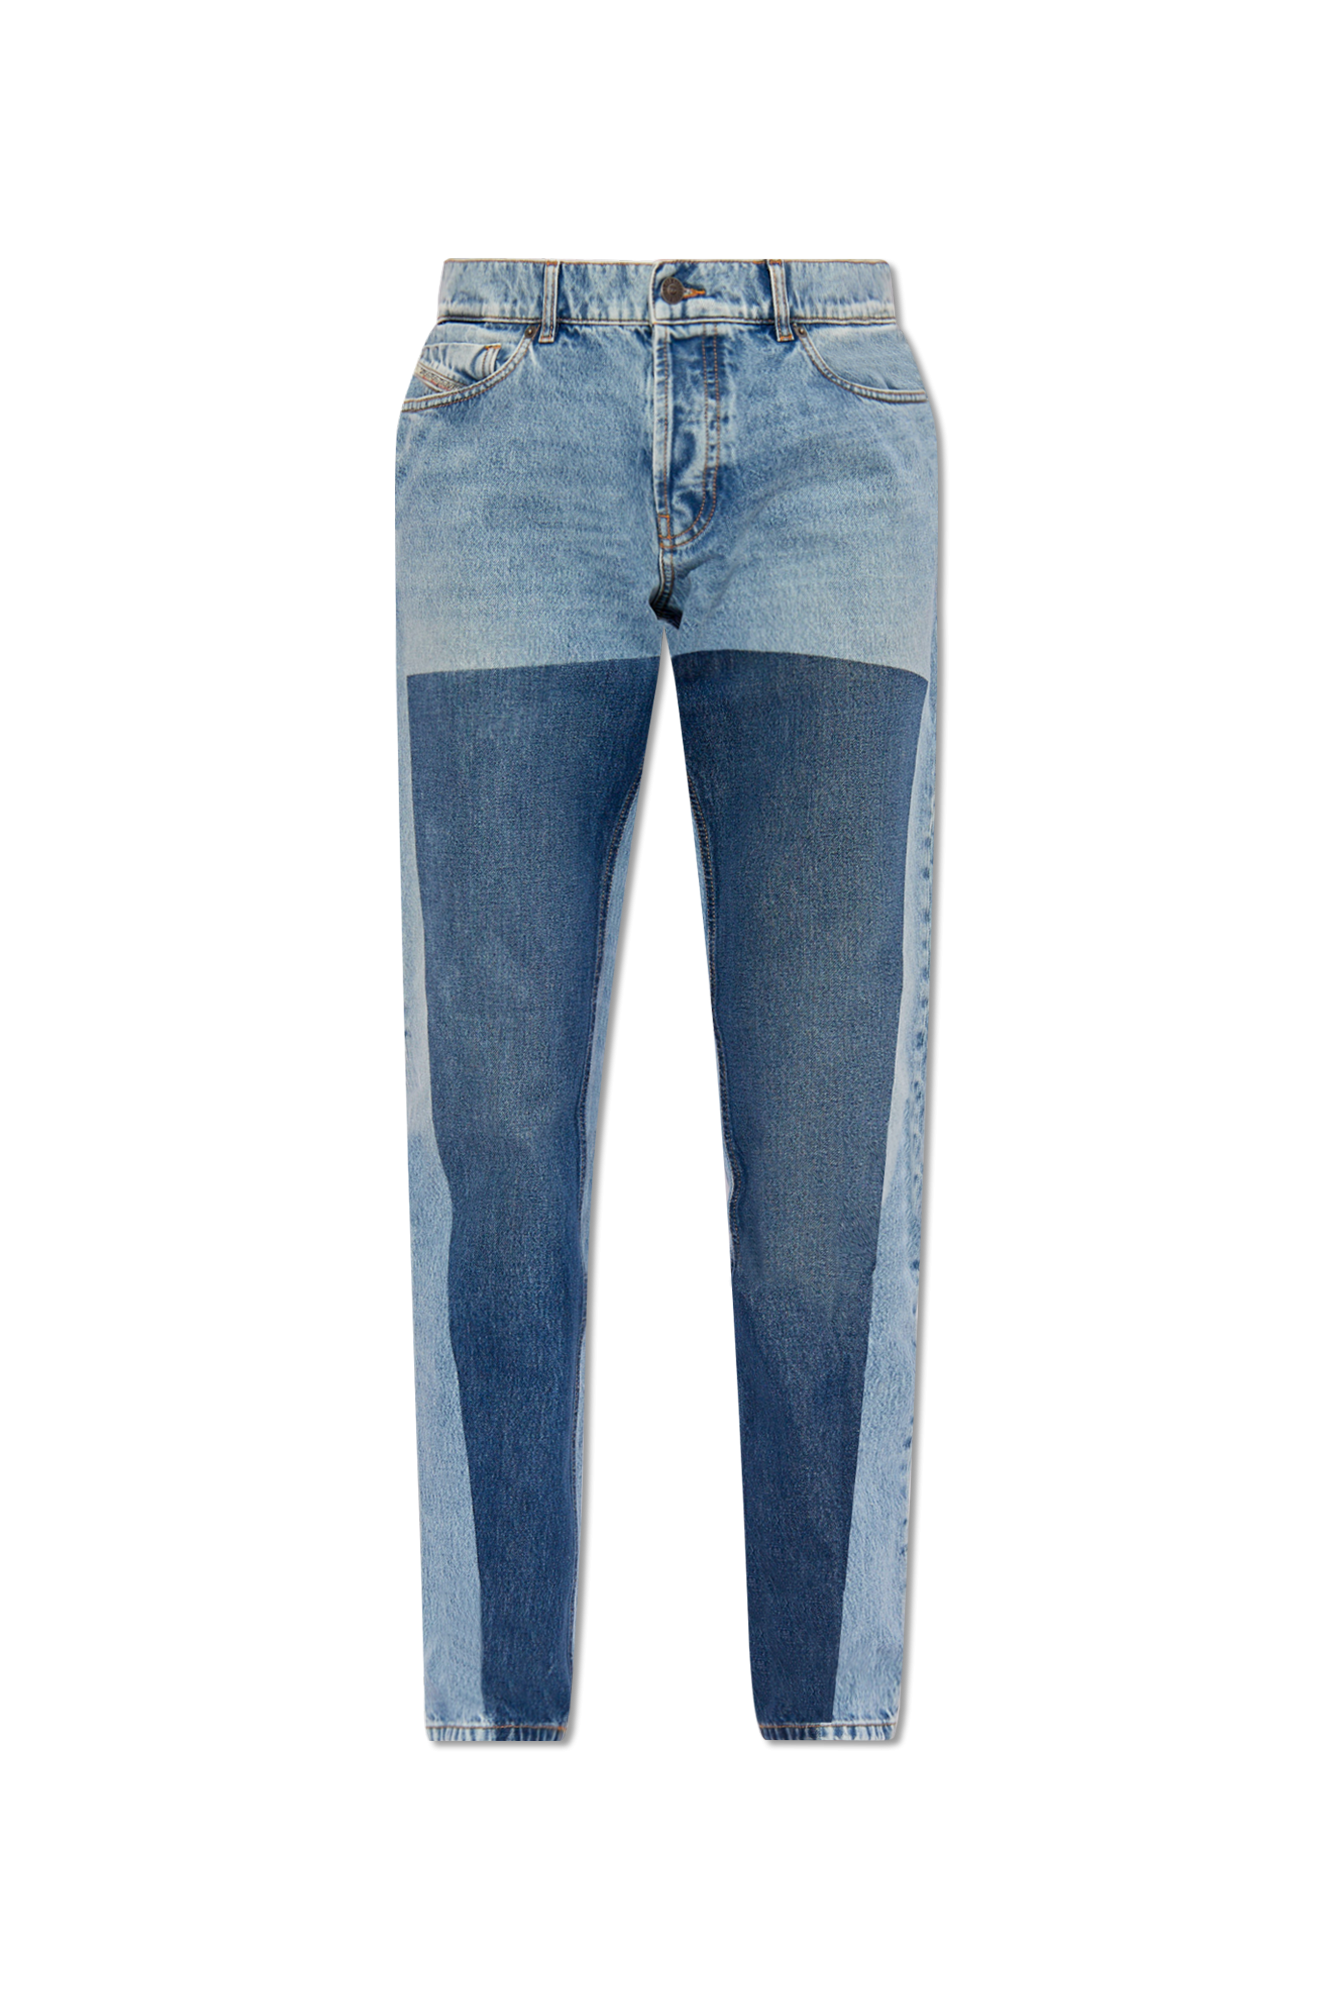 SARK - S' jeans Diesel - Rose Pull & Bear Jeans taille haute - IetpShops  Morocco - Navy blue 'D